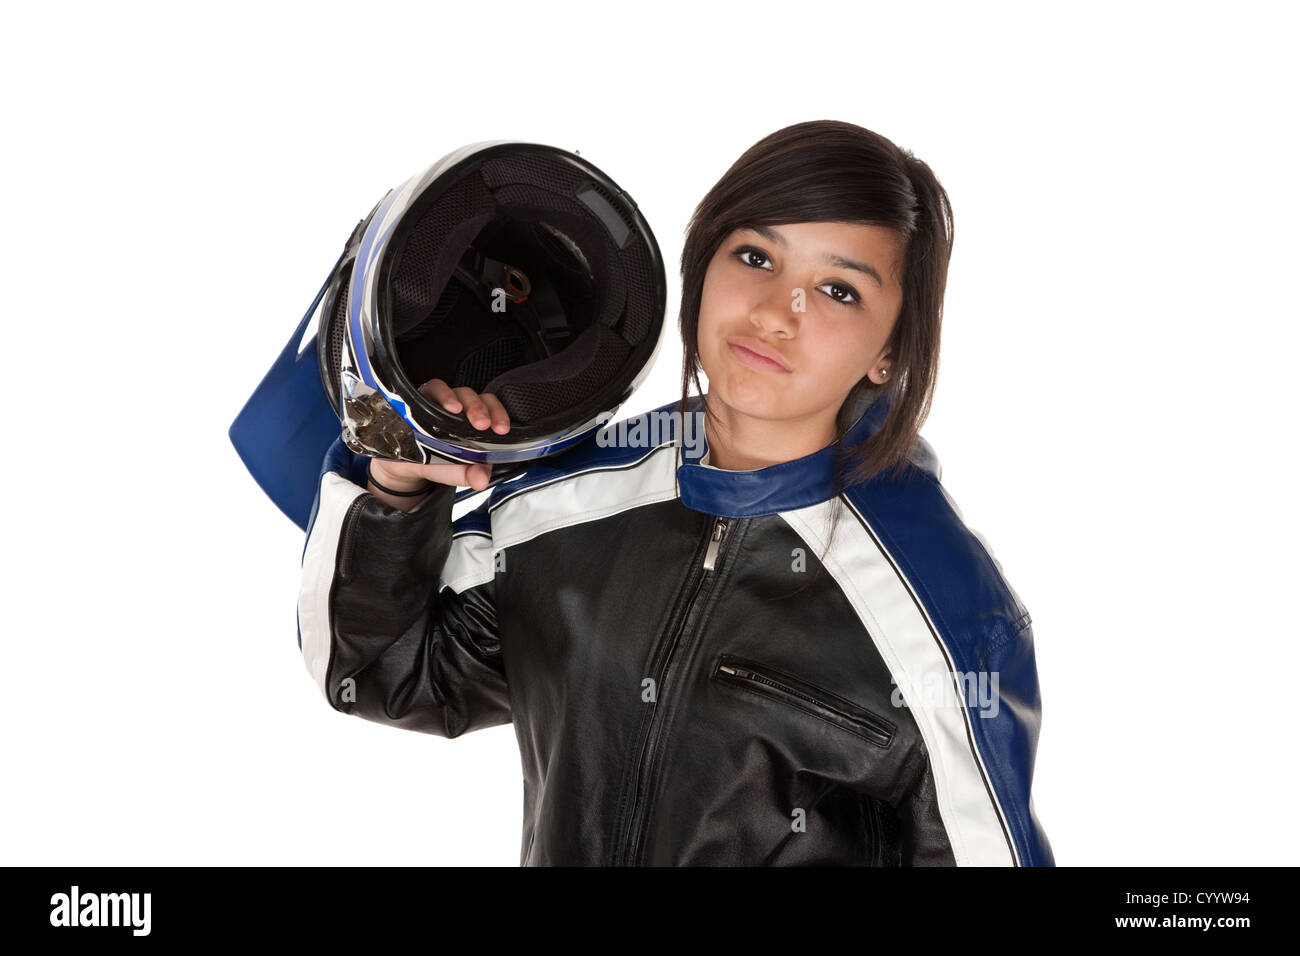 Latina teenage girl in motorcycle riding outfit and helmet Stock Photo